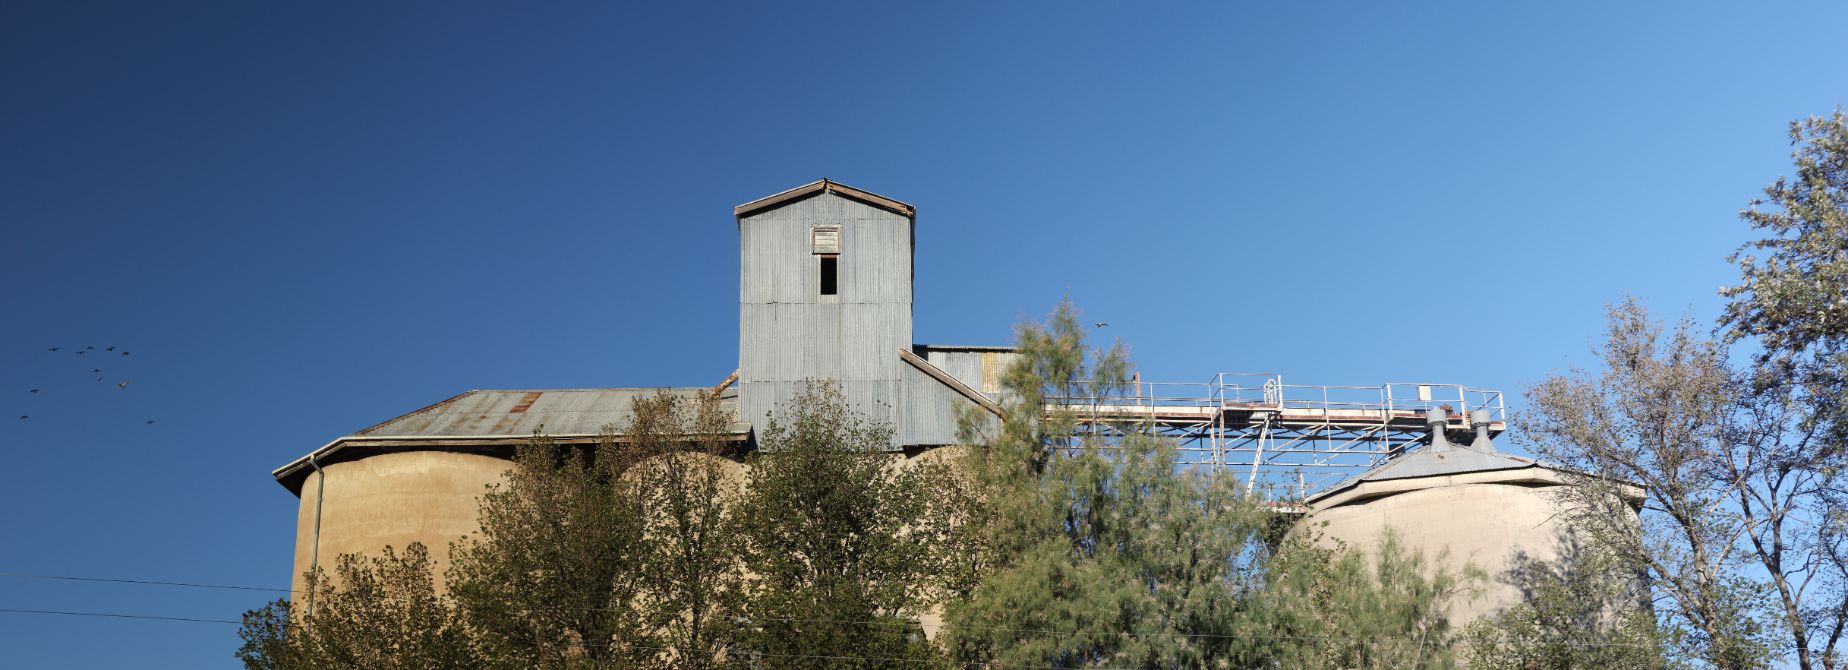 Tall wheat grain silos and building — Law Firm in Taree, NSW